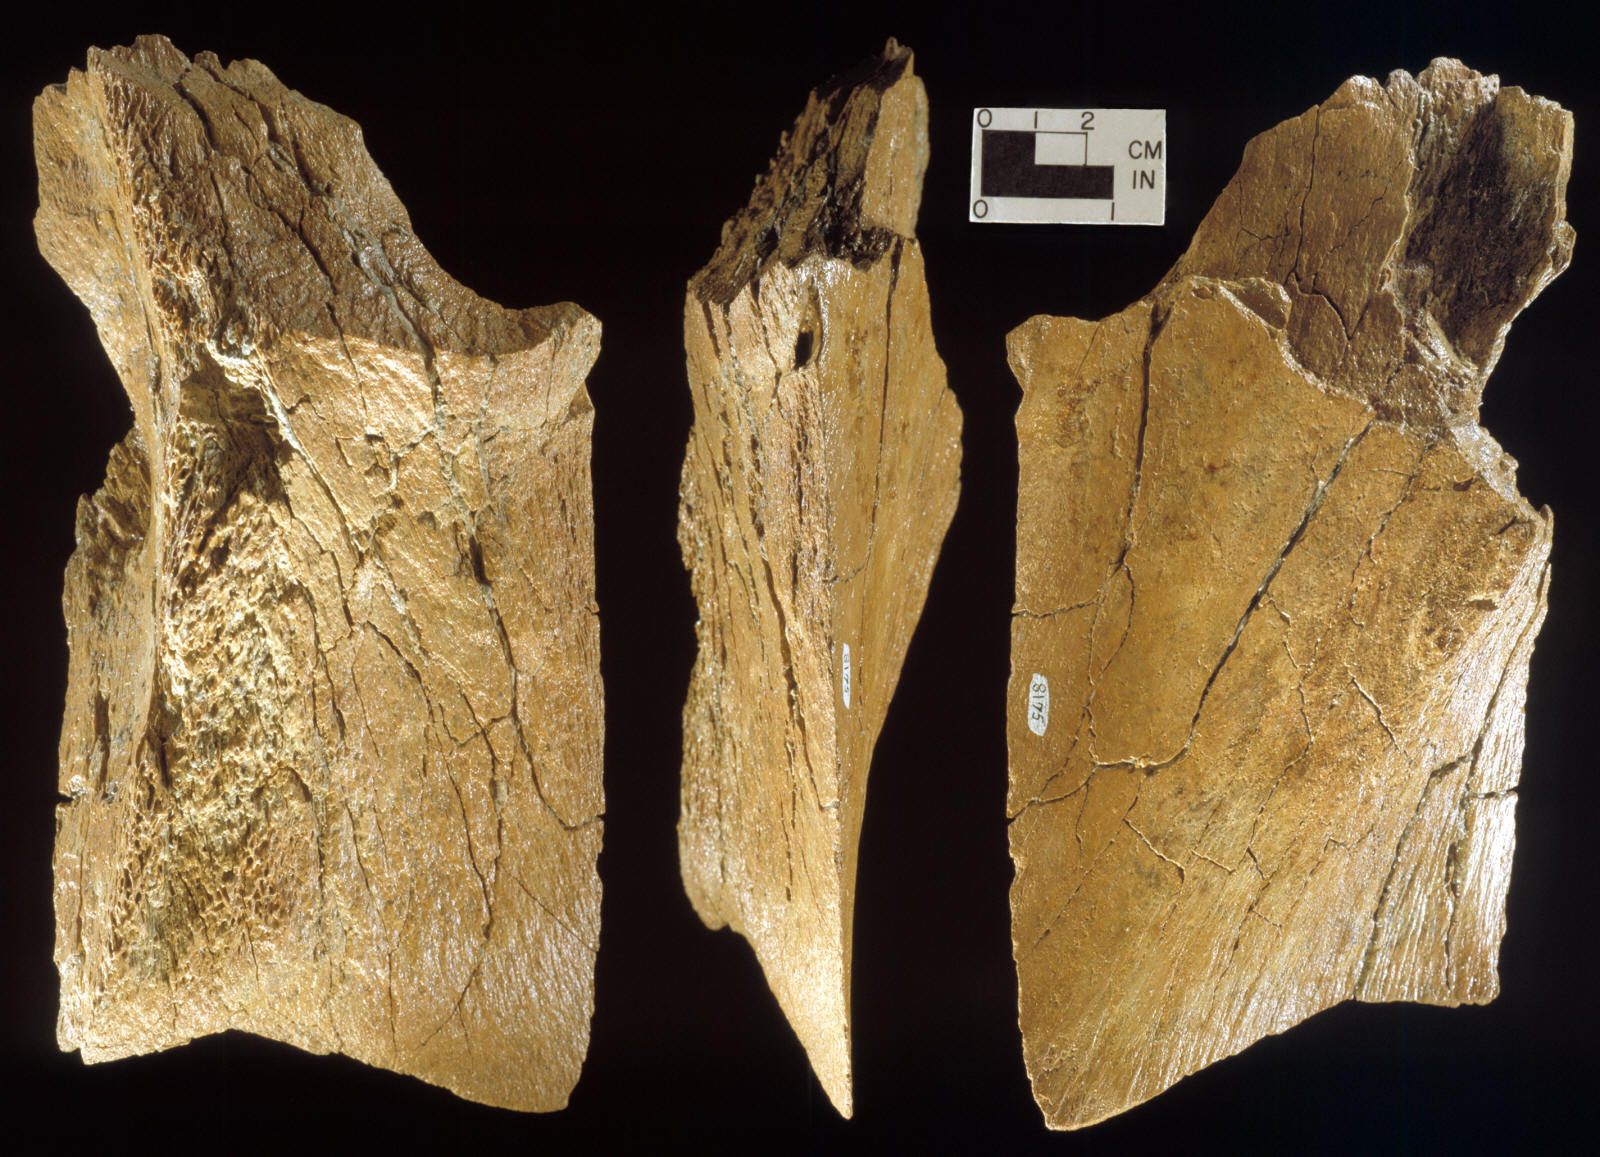 A midsection of mammoth bone fragment.